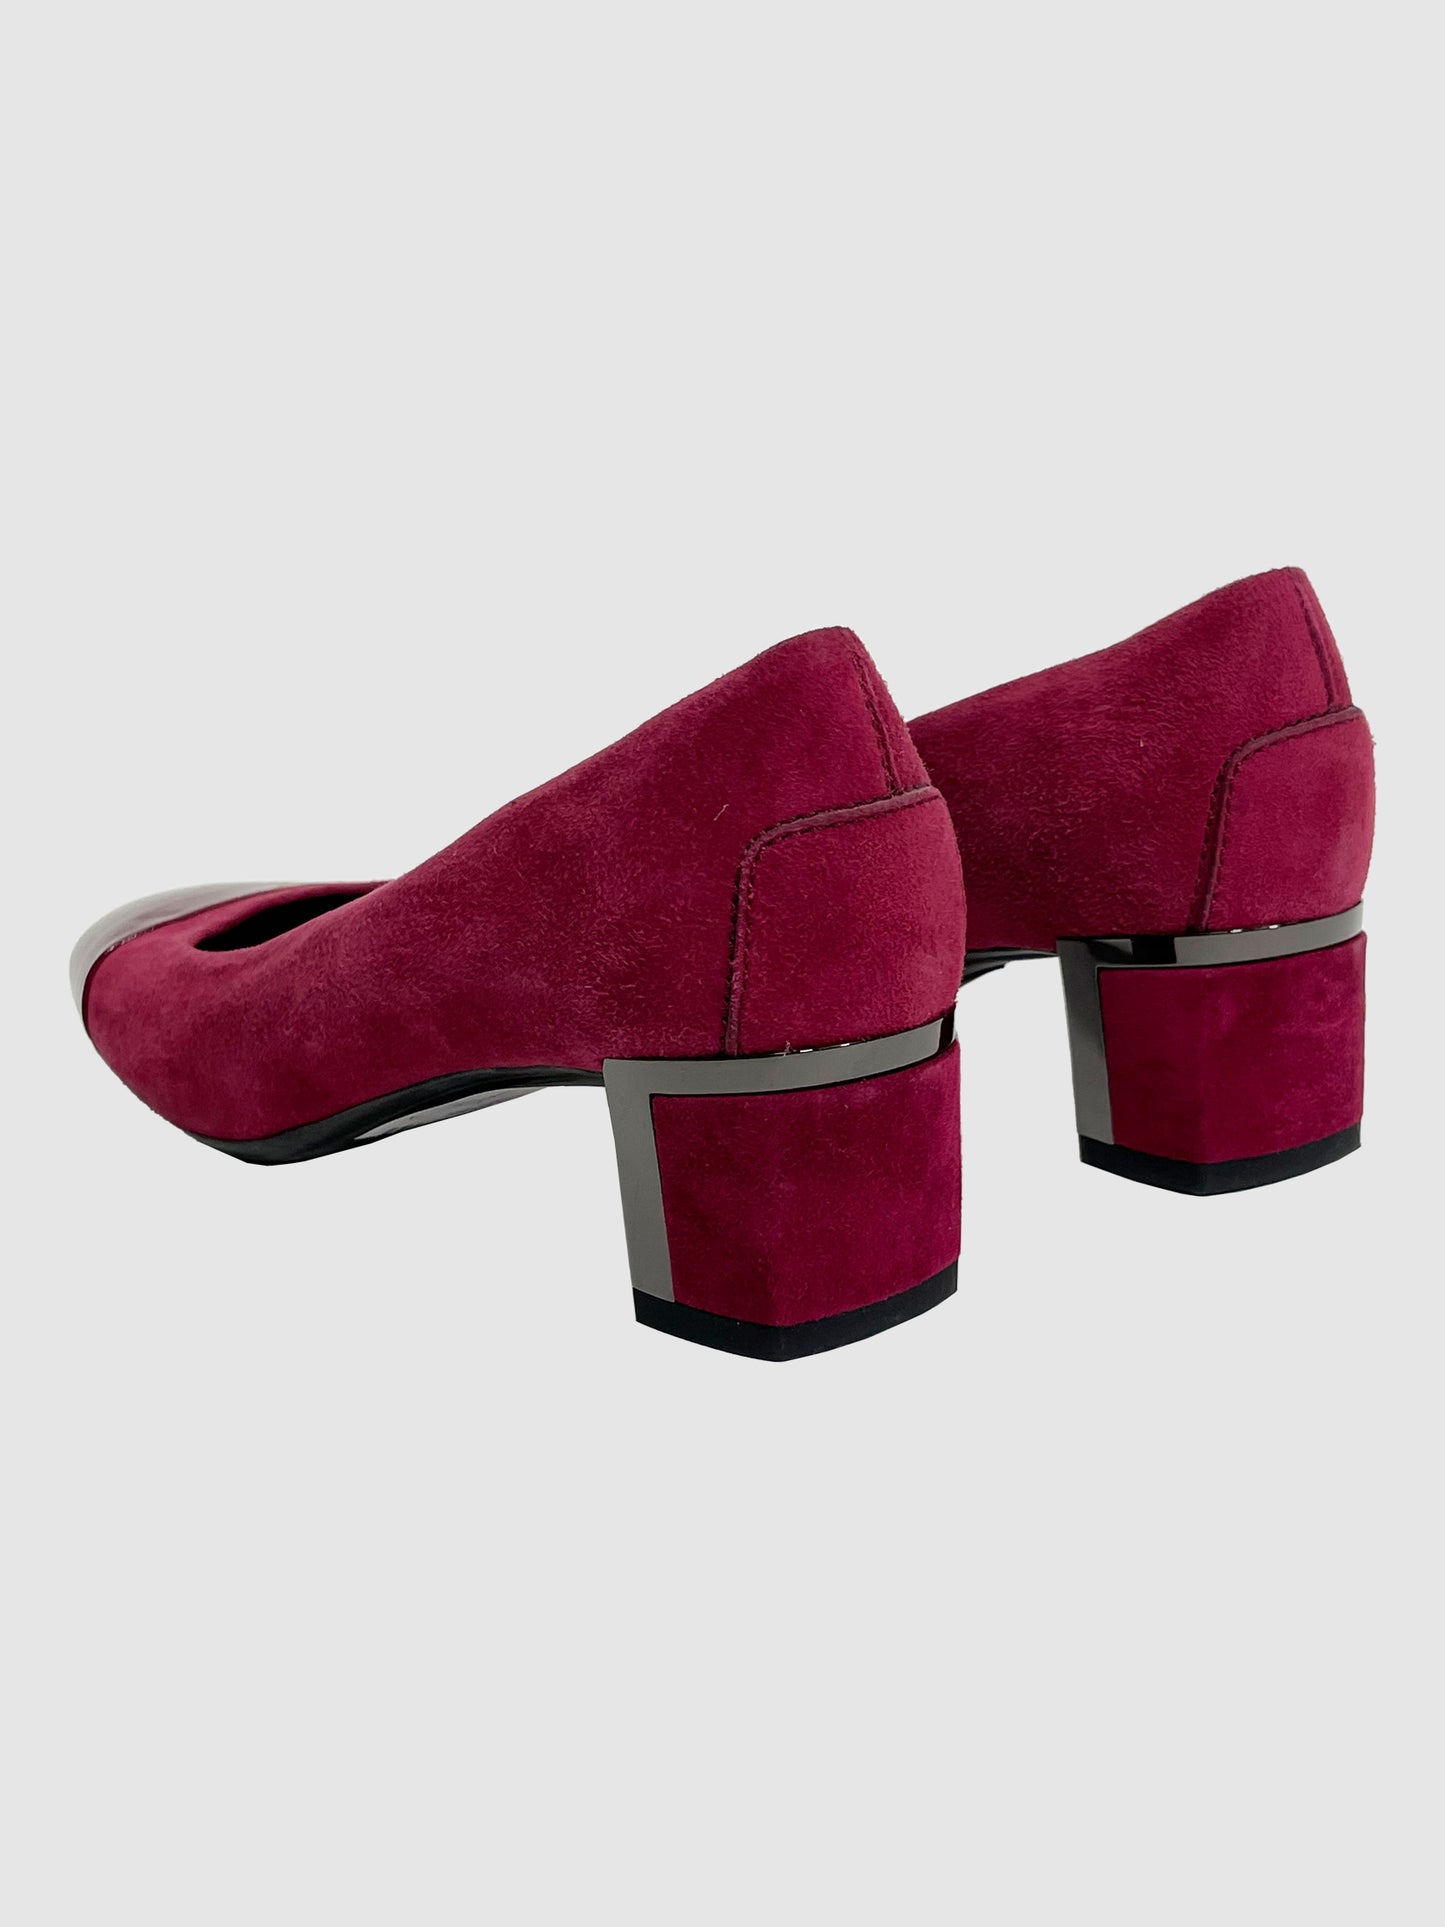 Tod's Burgundy Suede Pump - Size 37.5